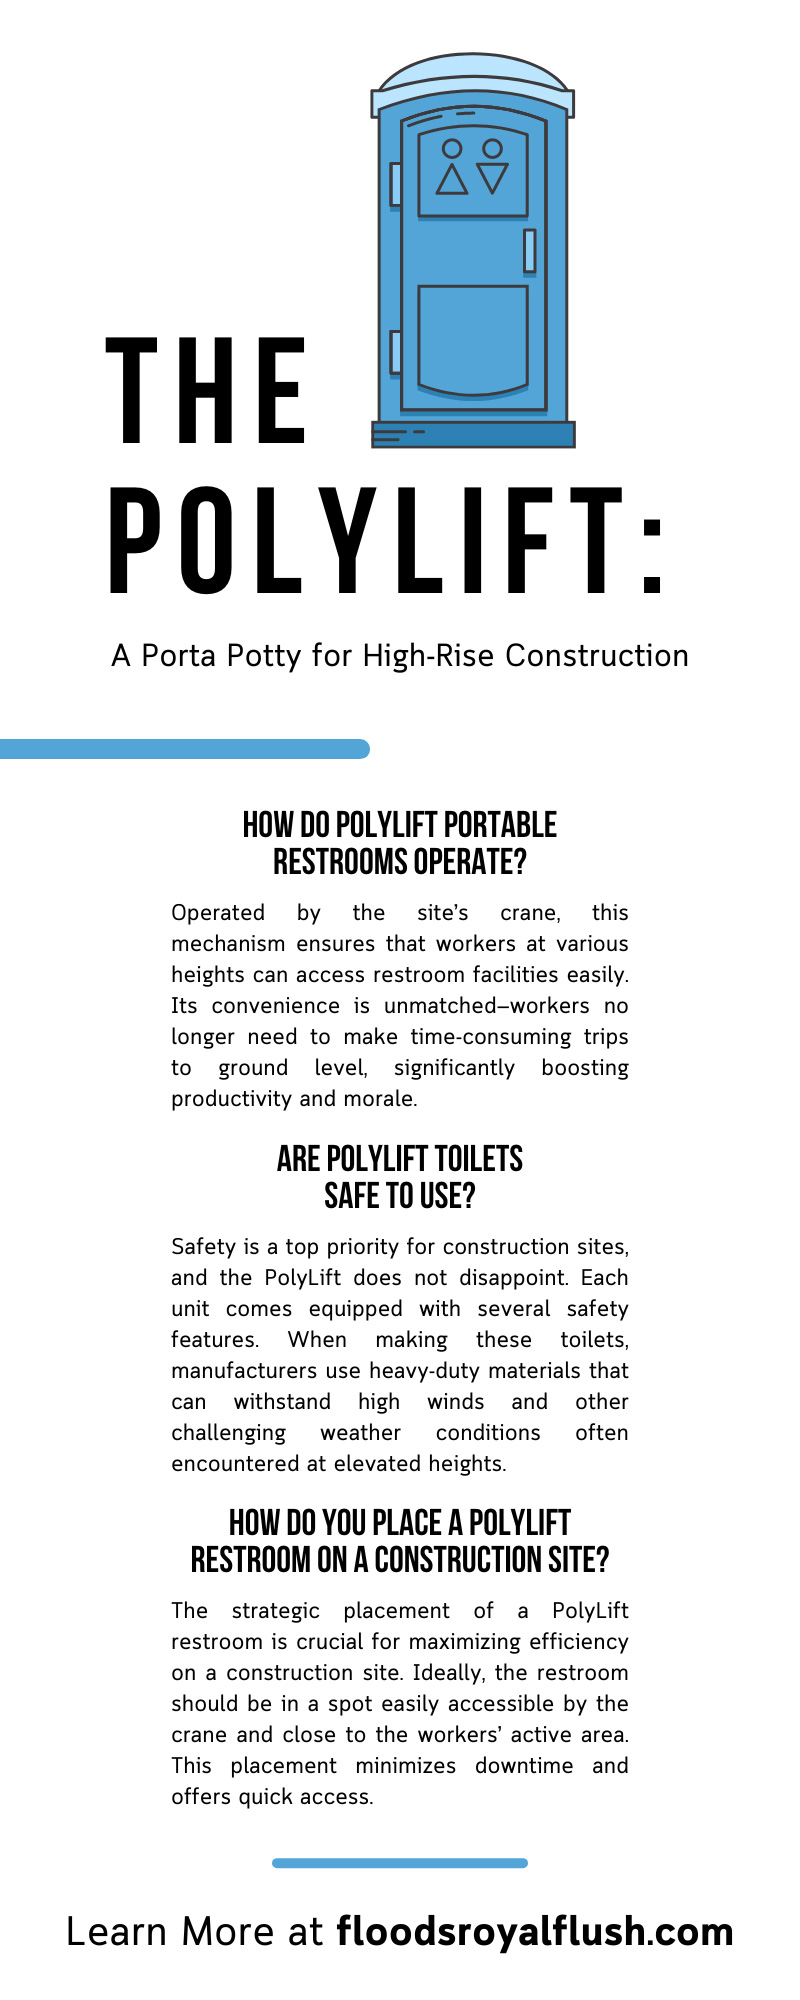 The PolyLift: A Porta Potty for High-Rise Construction
